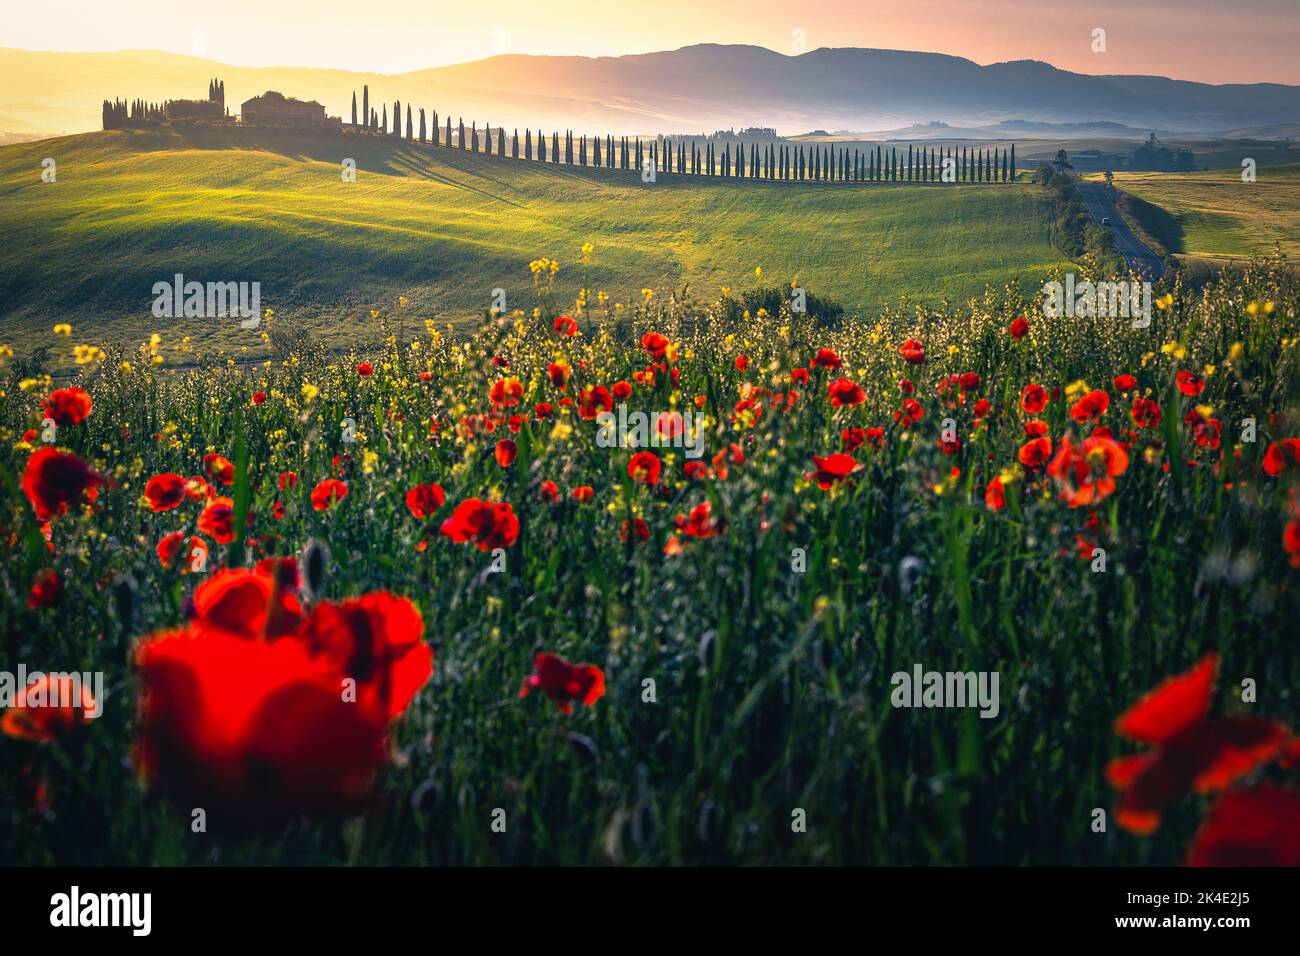 Stunning landscape with red poppies and colorful flowers on the hill. Misty valley and rural road with cypresses in row at sunrise, Tuscany, Italy, Eu Stock Photo